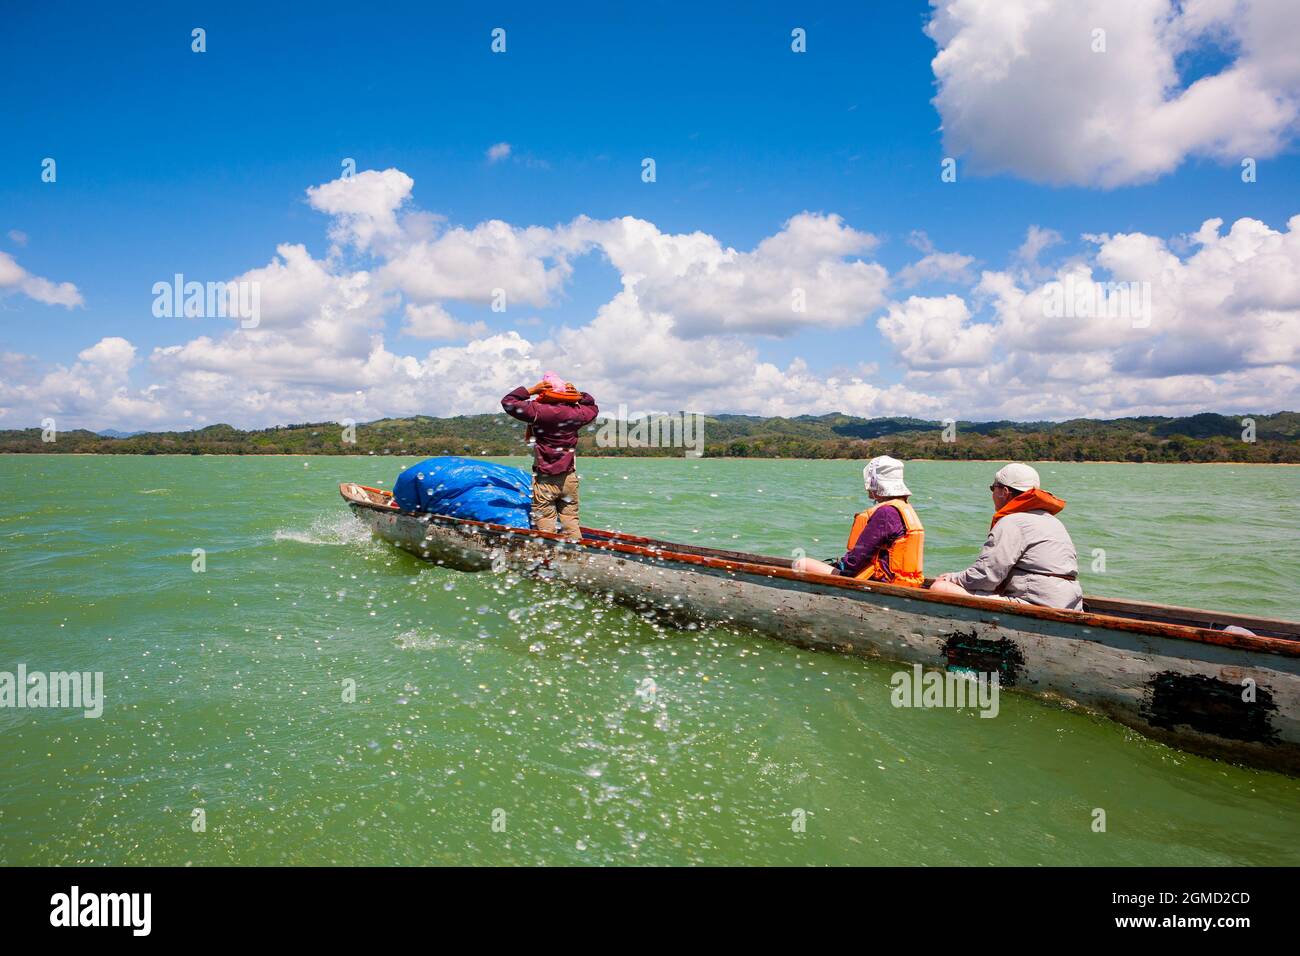 A dugout canoe with three adventurers is crossing Alajuela lake, Panama province, Republic of Panama, Central America. Stock Photo